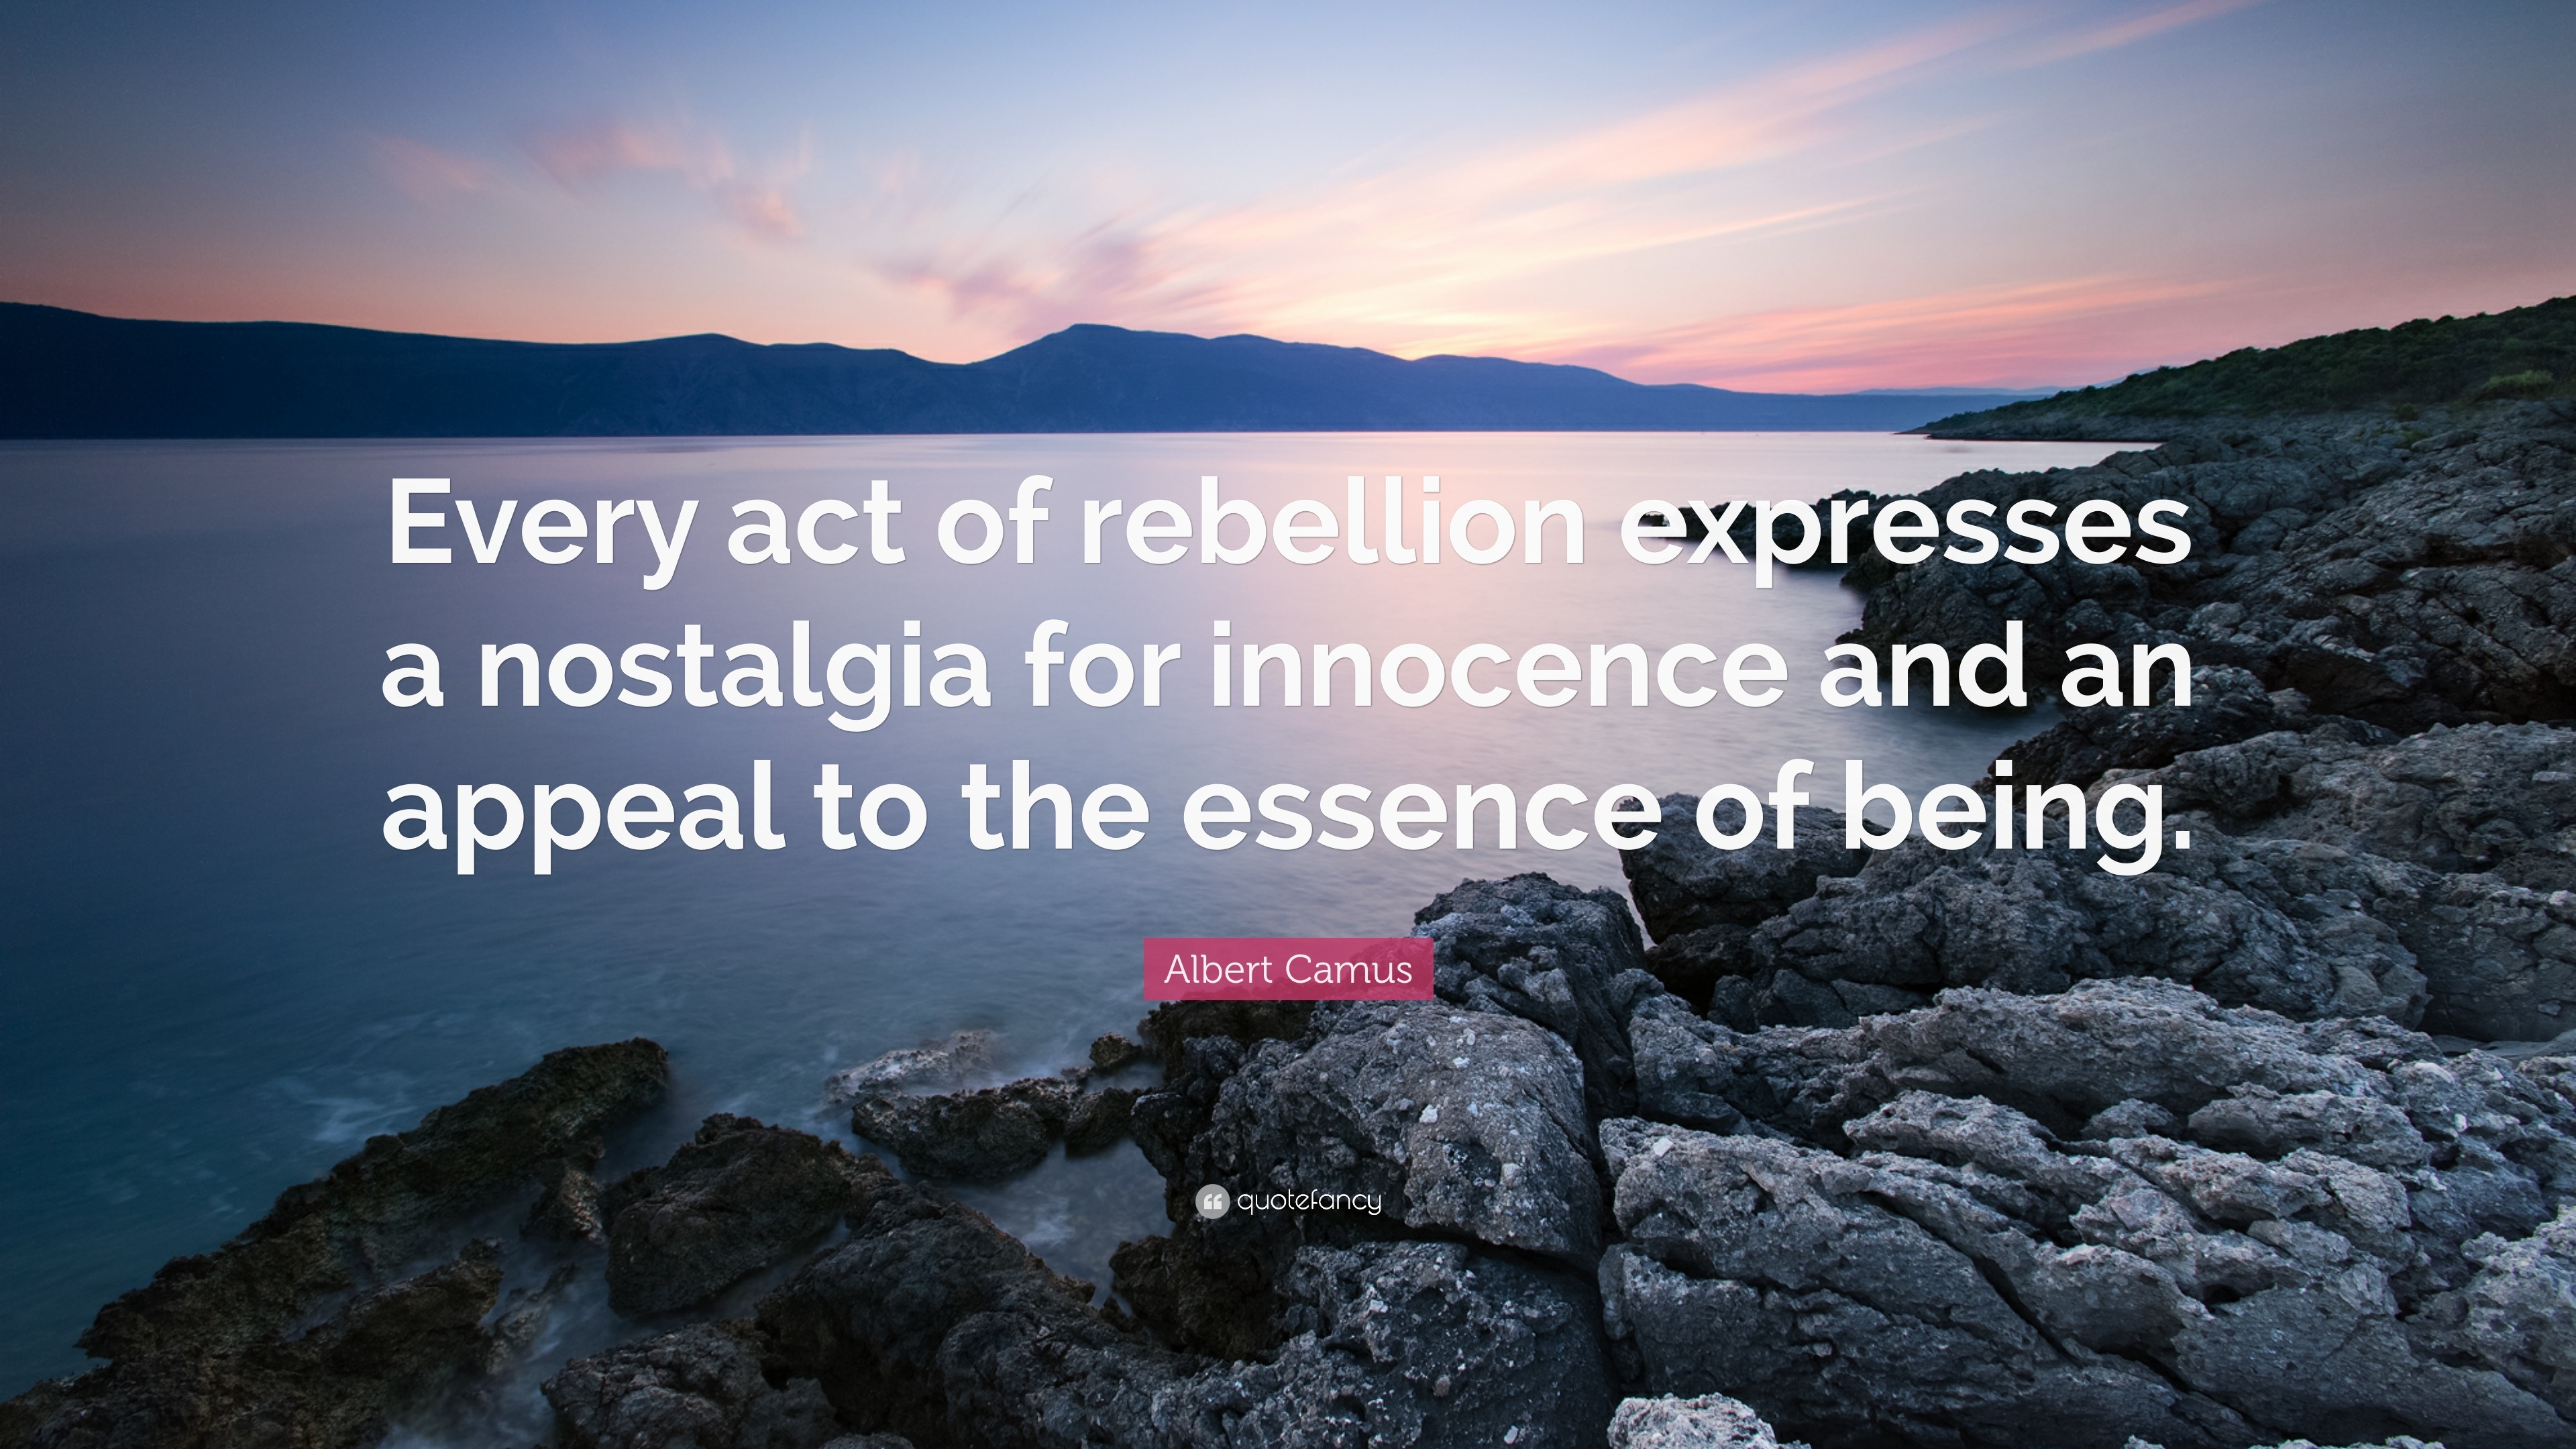 Albert Camus Quote “Every act of rebellion expresses a nostalgia for